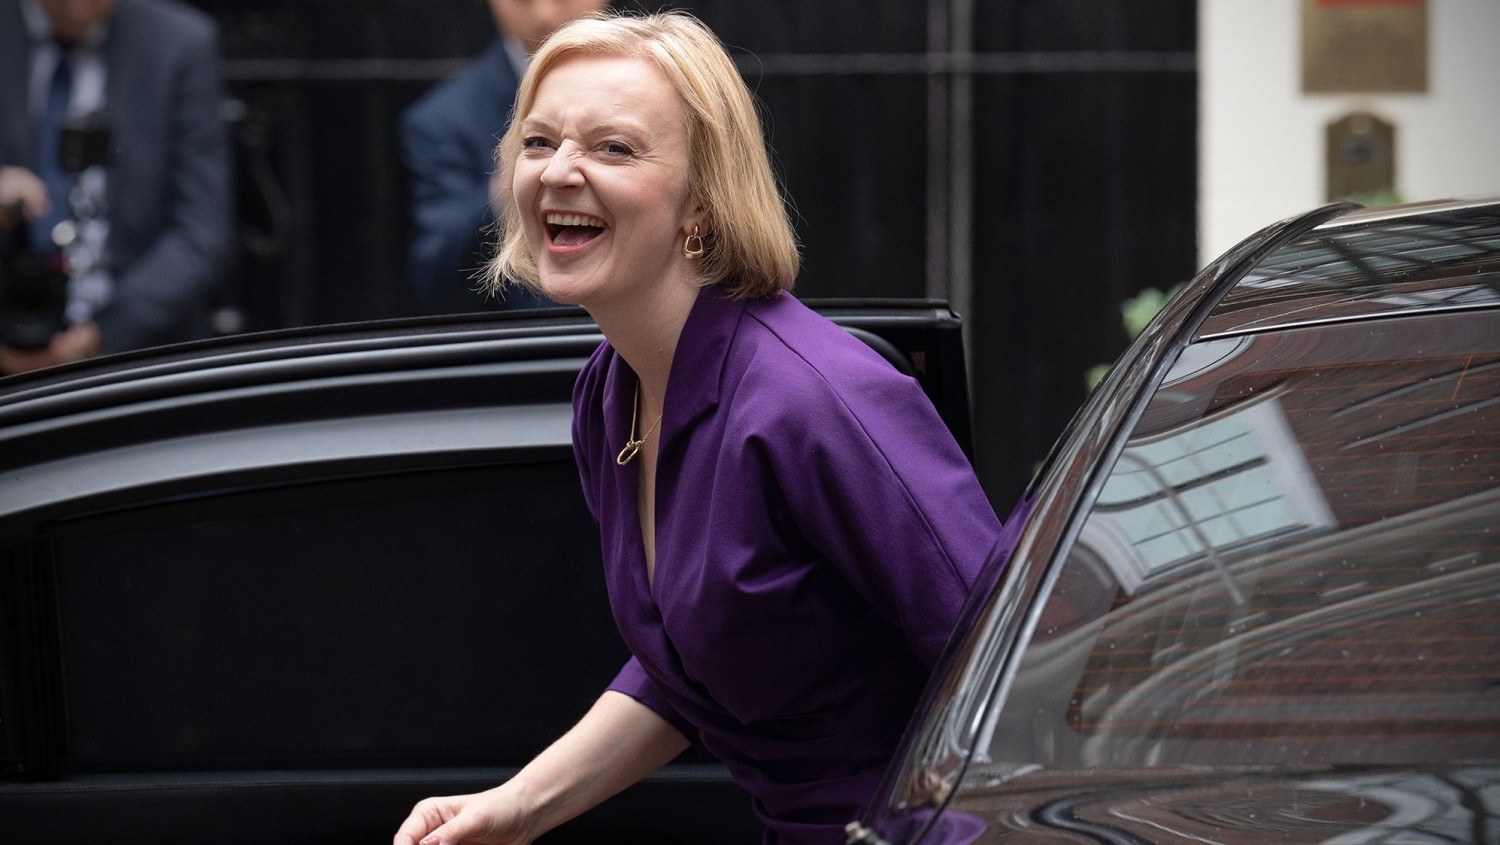 Carl Court/Getty Images | Truss is eligible for an annual allowance to cover the cost of public duties after leaving office